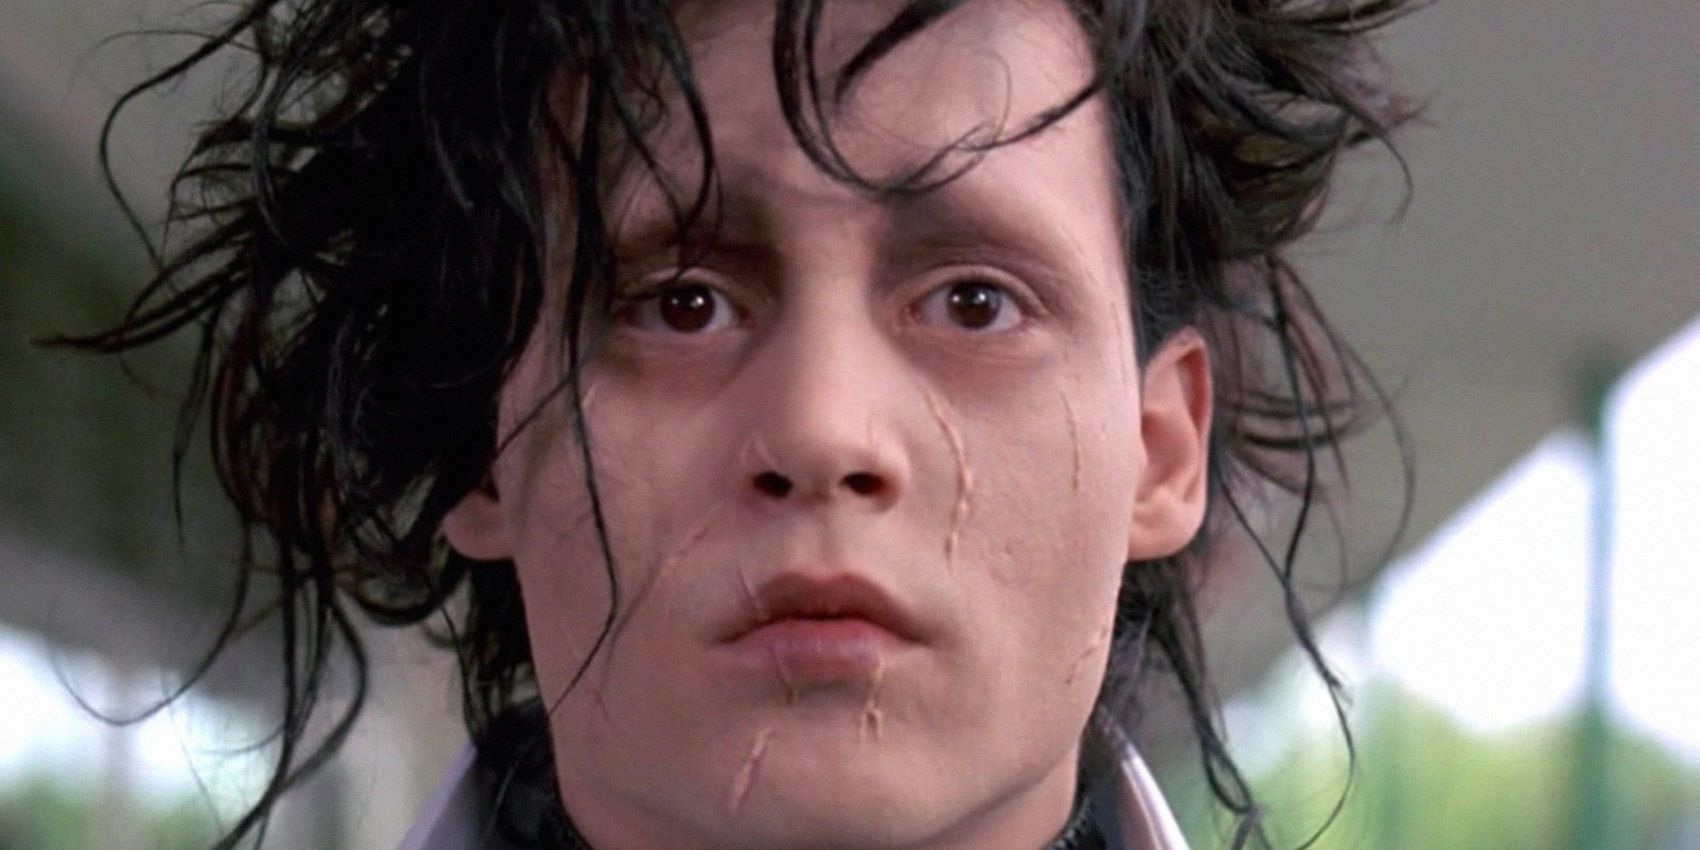 10 Things You Didn’t Know About Edward Scissorhands